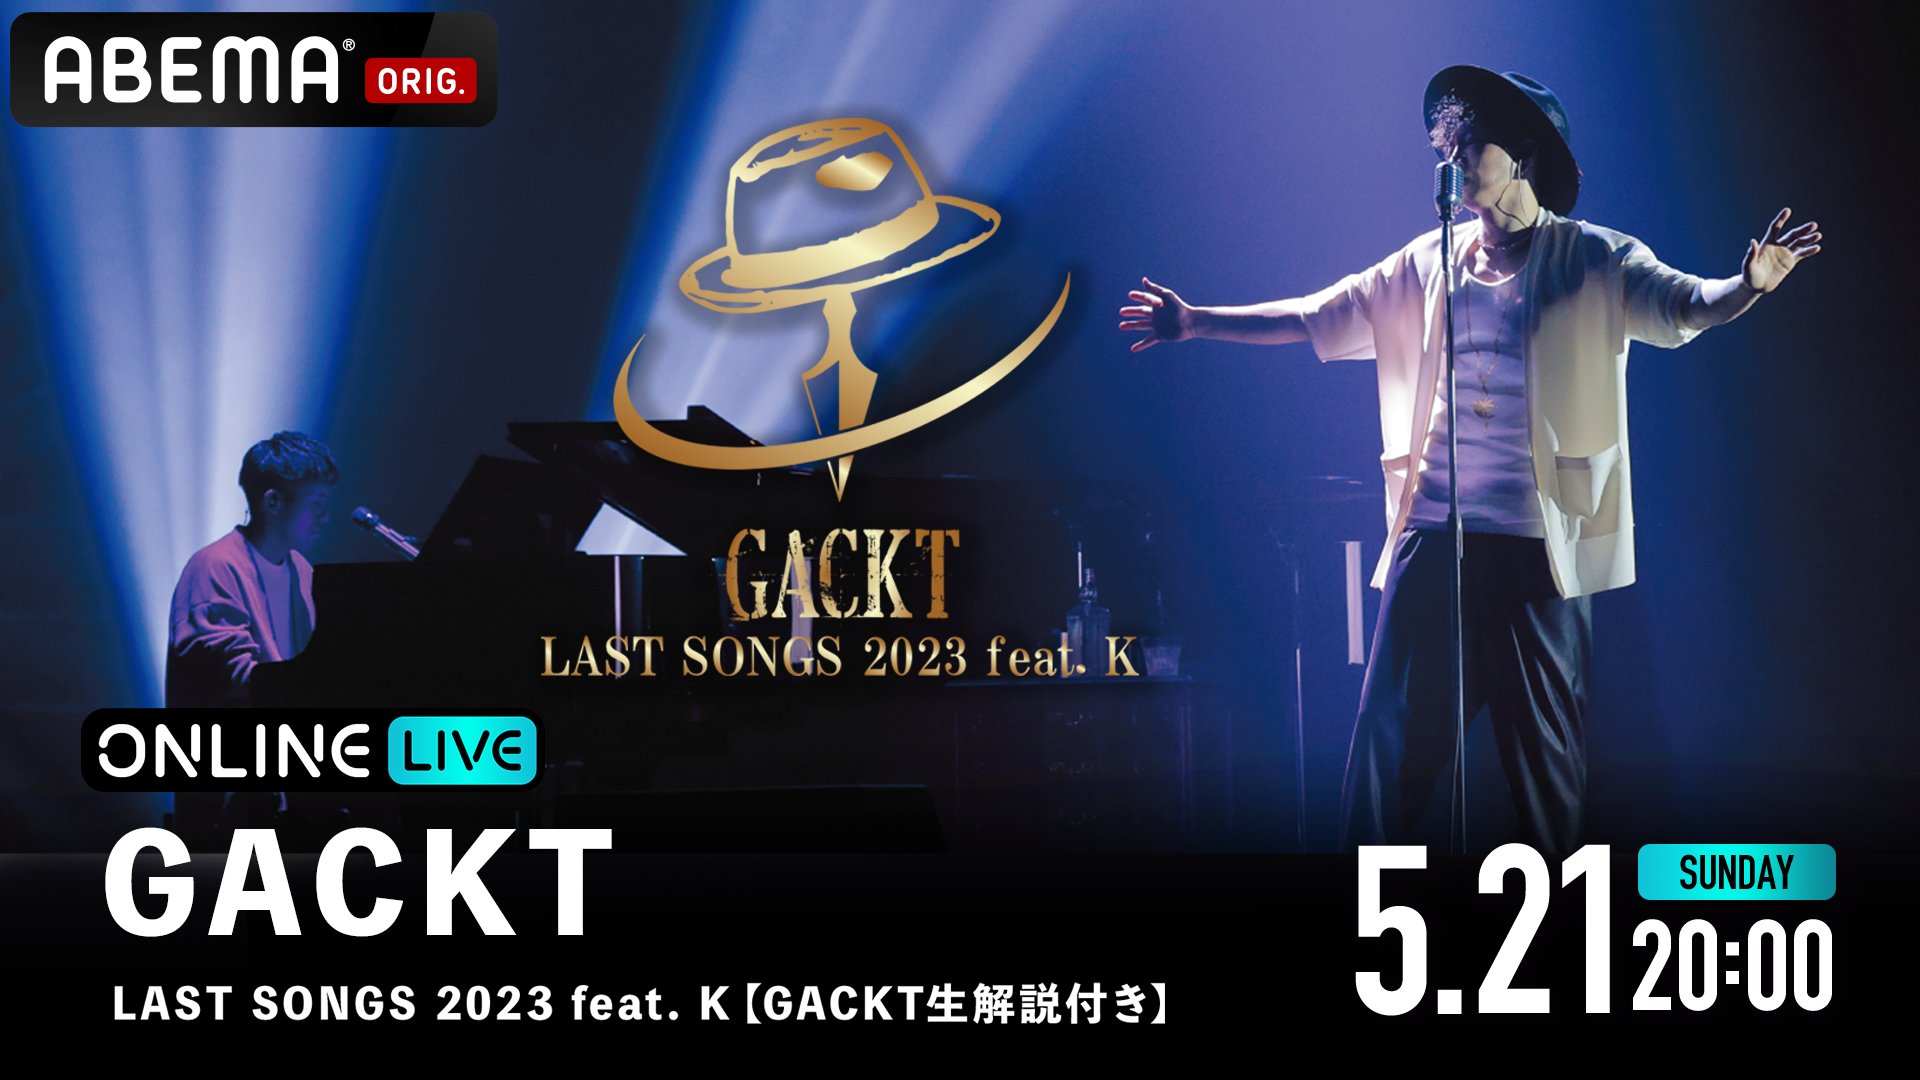 GACKT LAST SONGS 2023 feat. K』を5月21日(日)20時よりGACKT